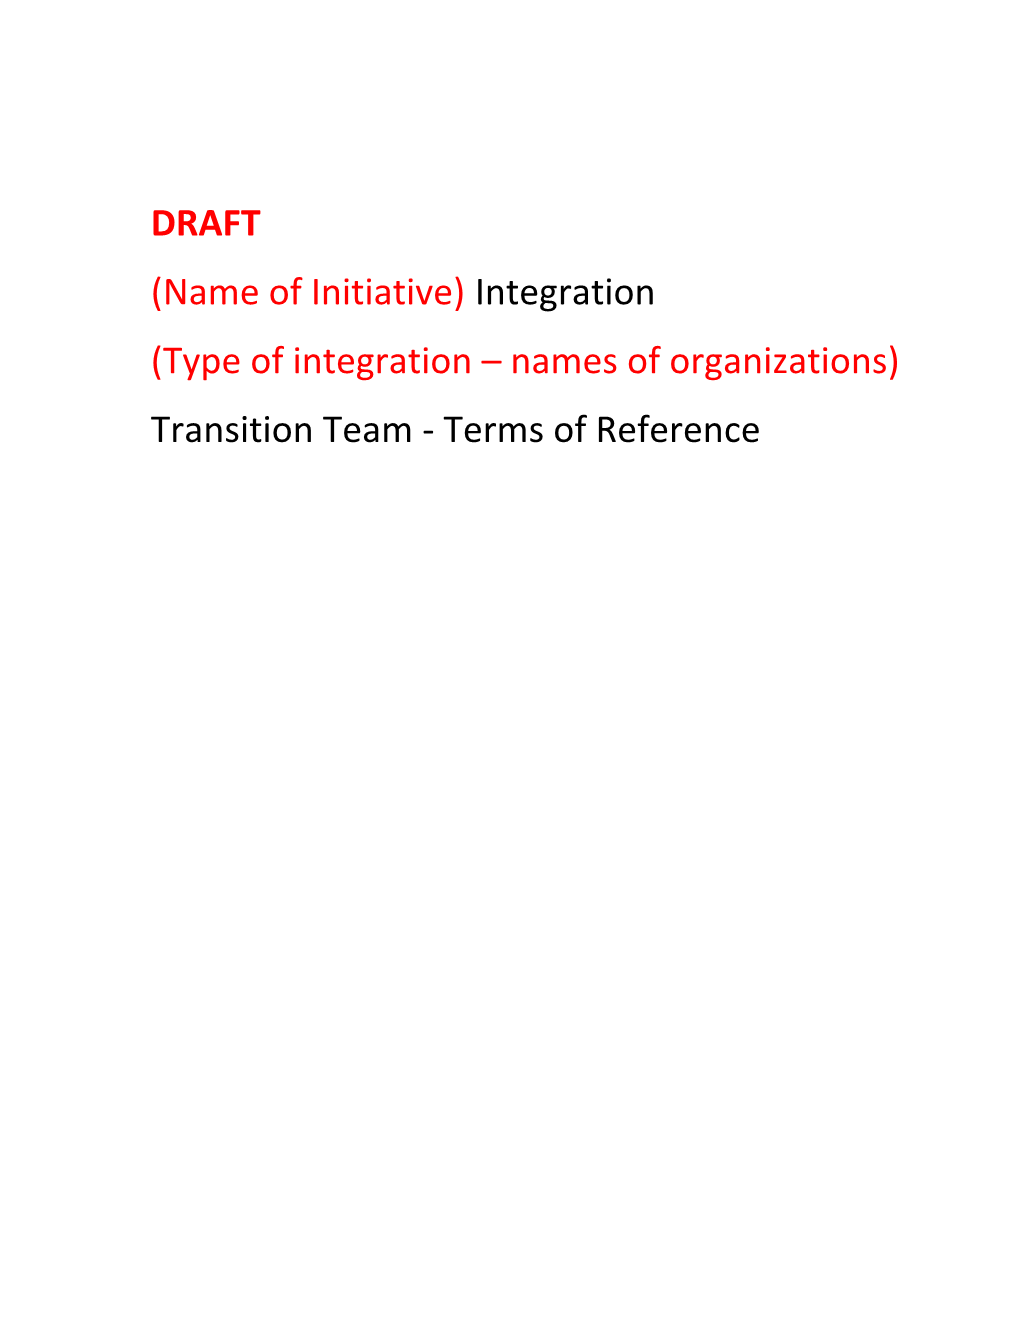 Type of Integration Names of Organizations